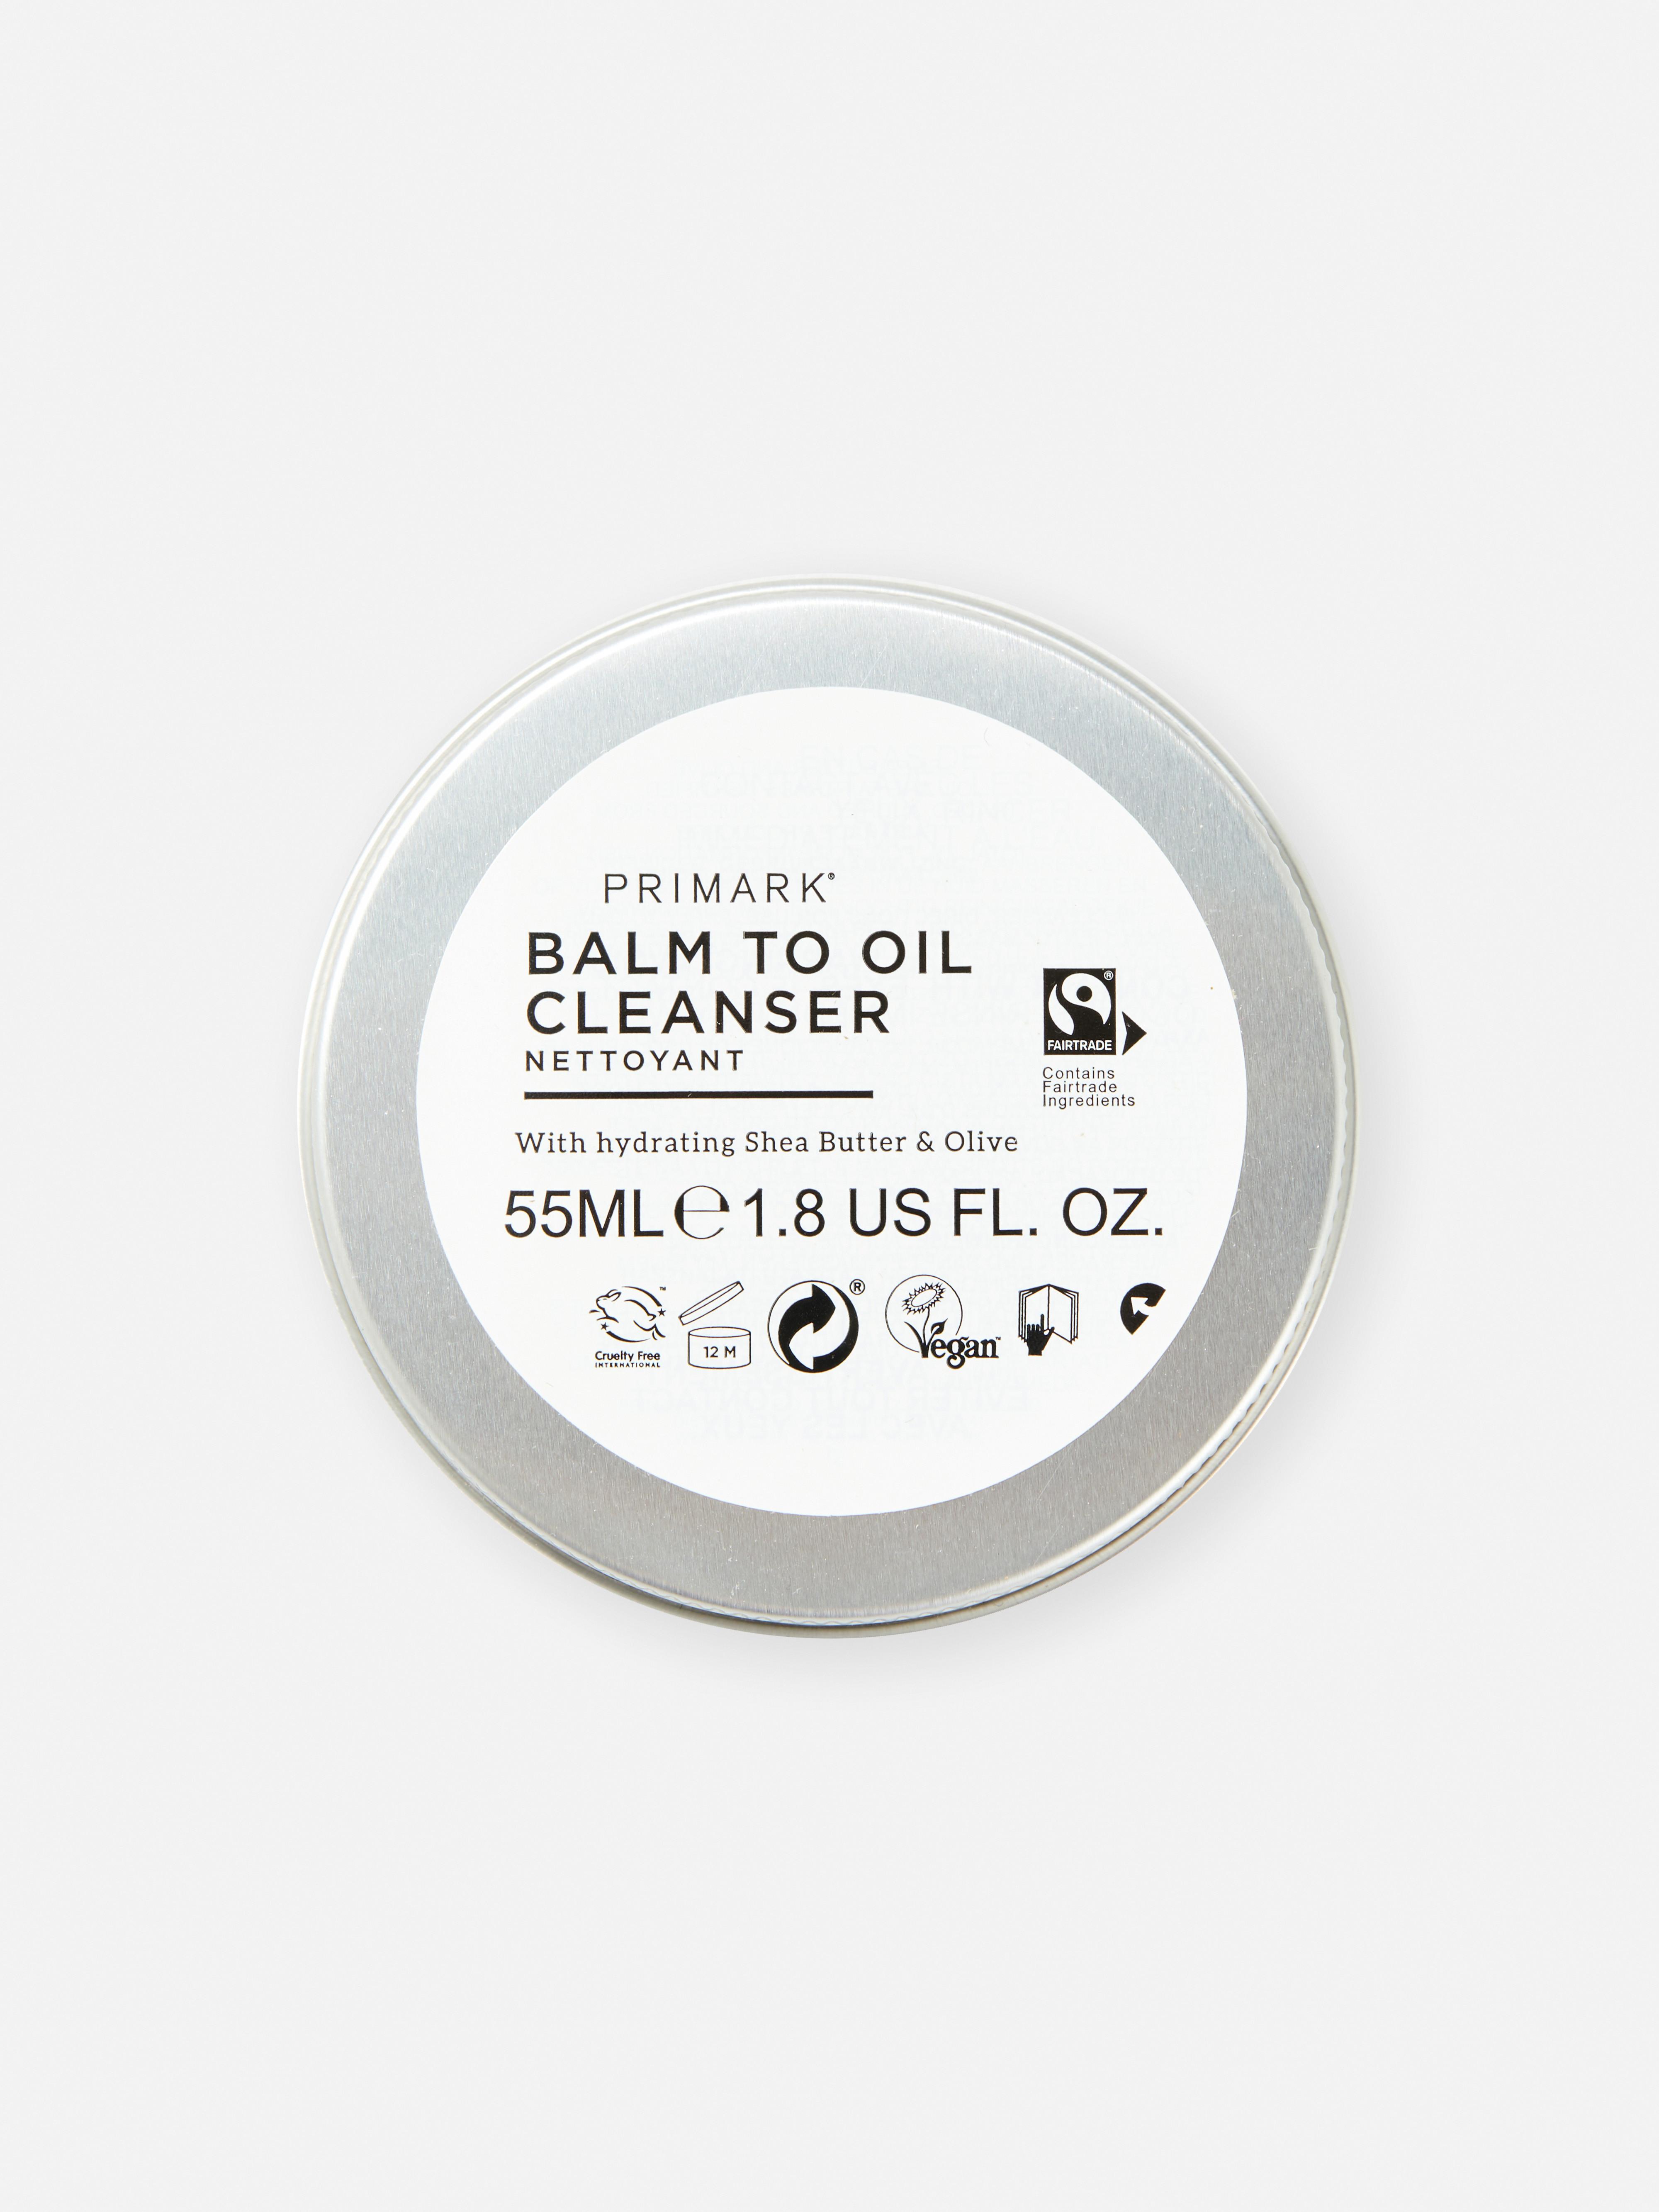 Balm to Oil Cleanser